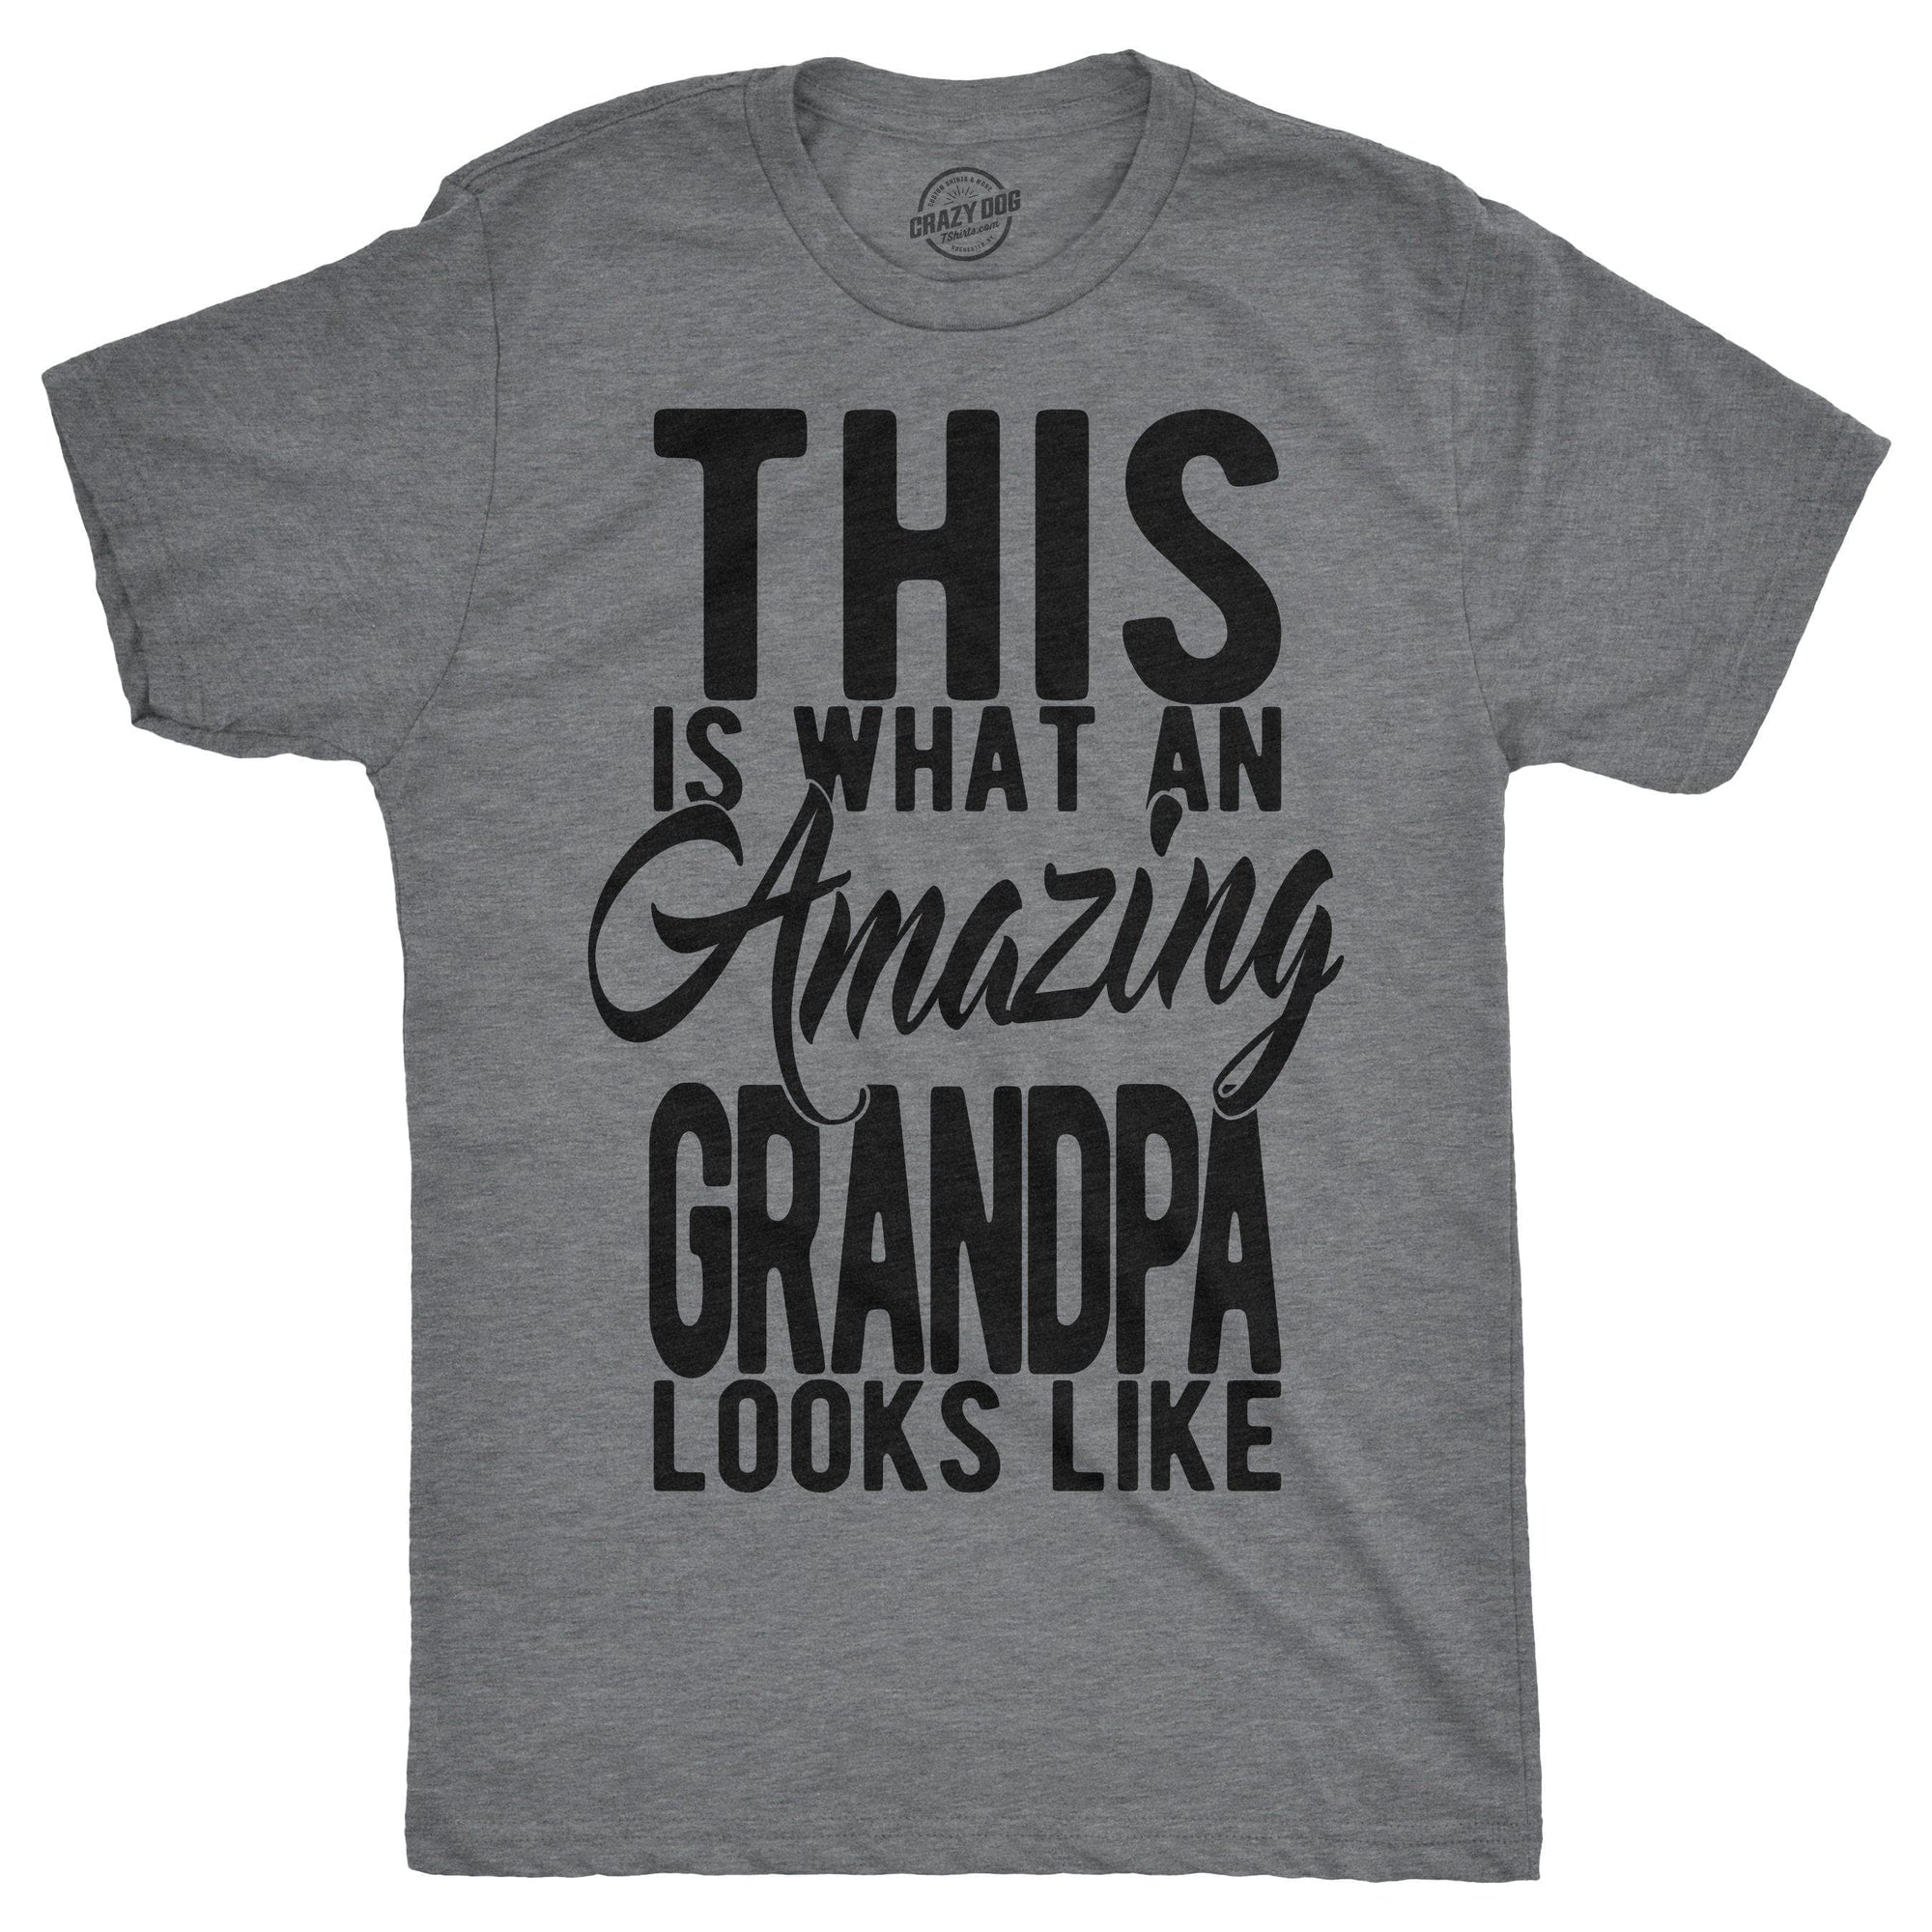 This Is What An Amazing Grandpa Looks Like Men's Tshirt  -  Crazy Dog T-Shirts